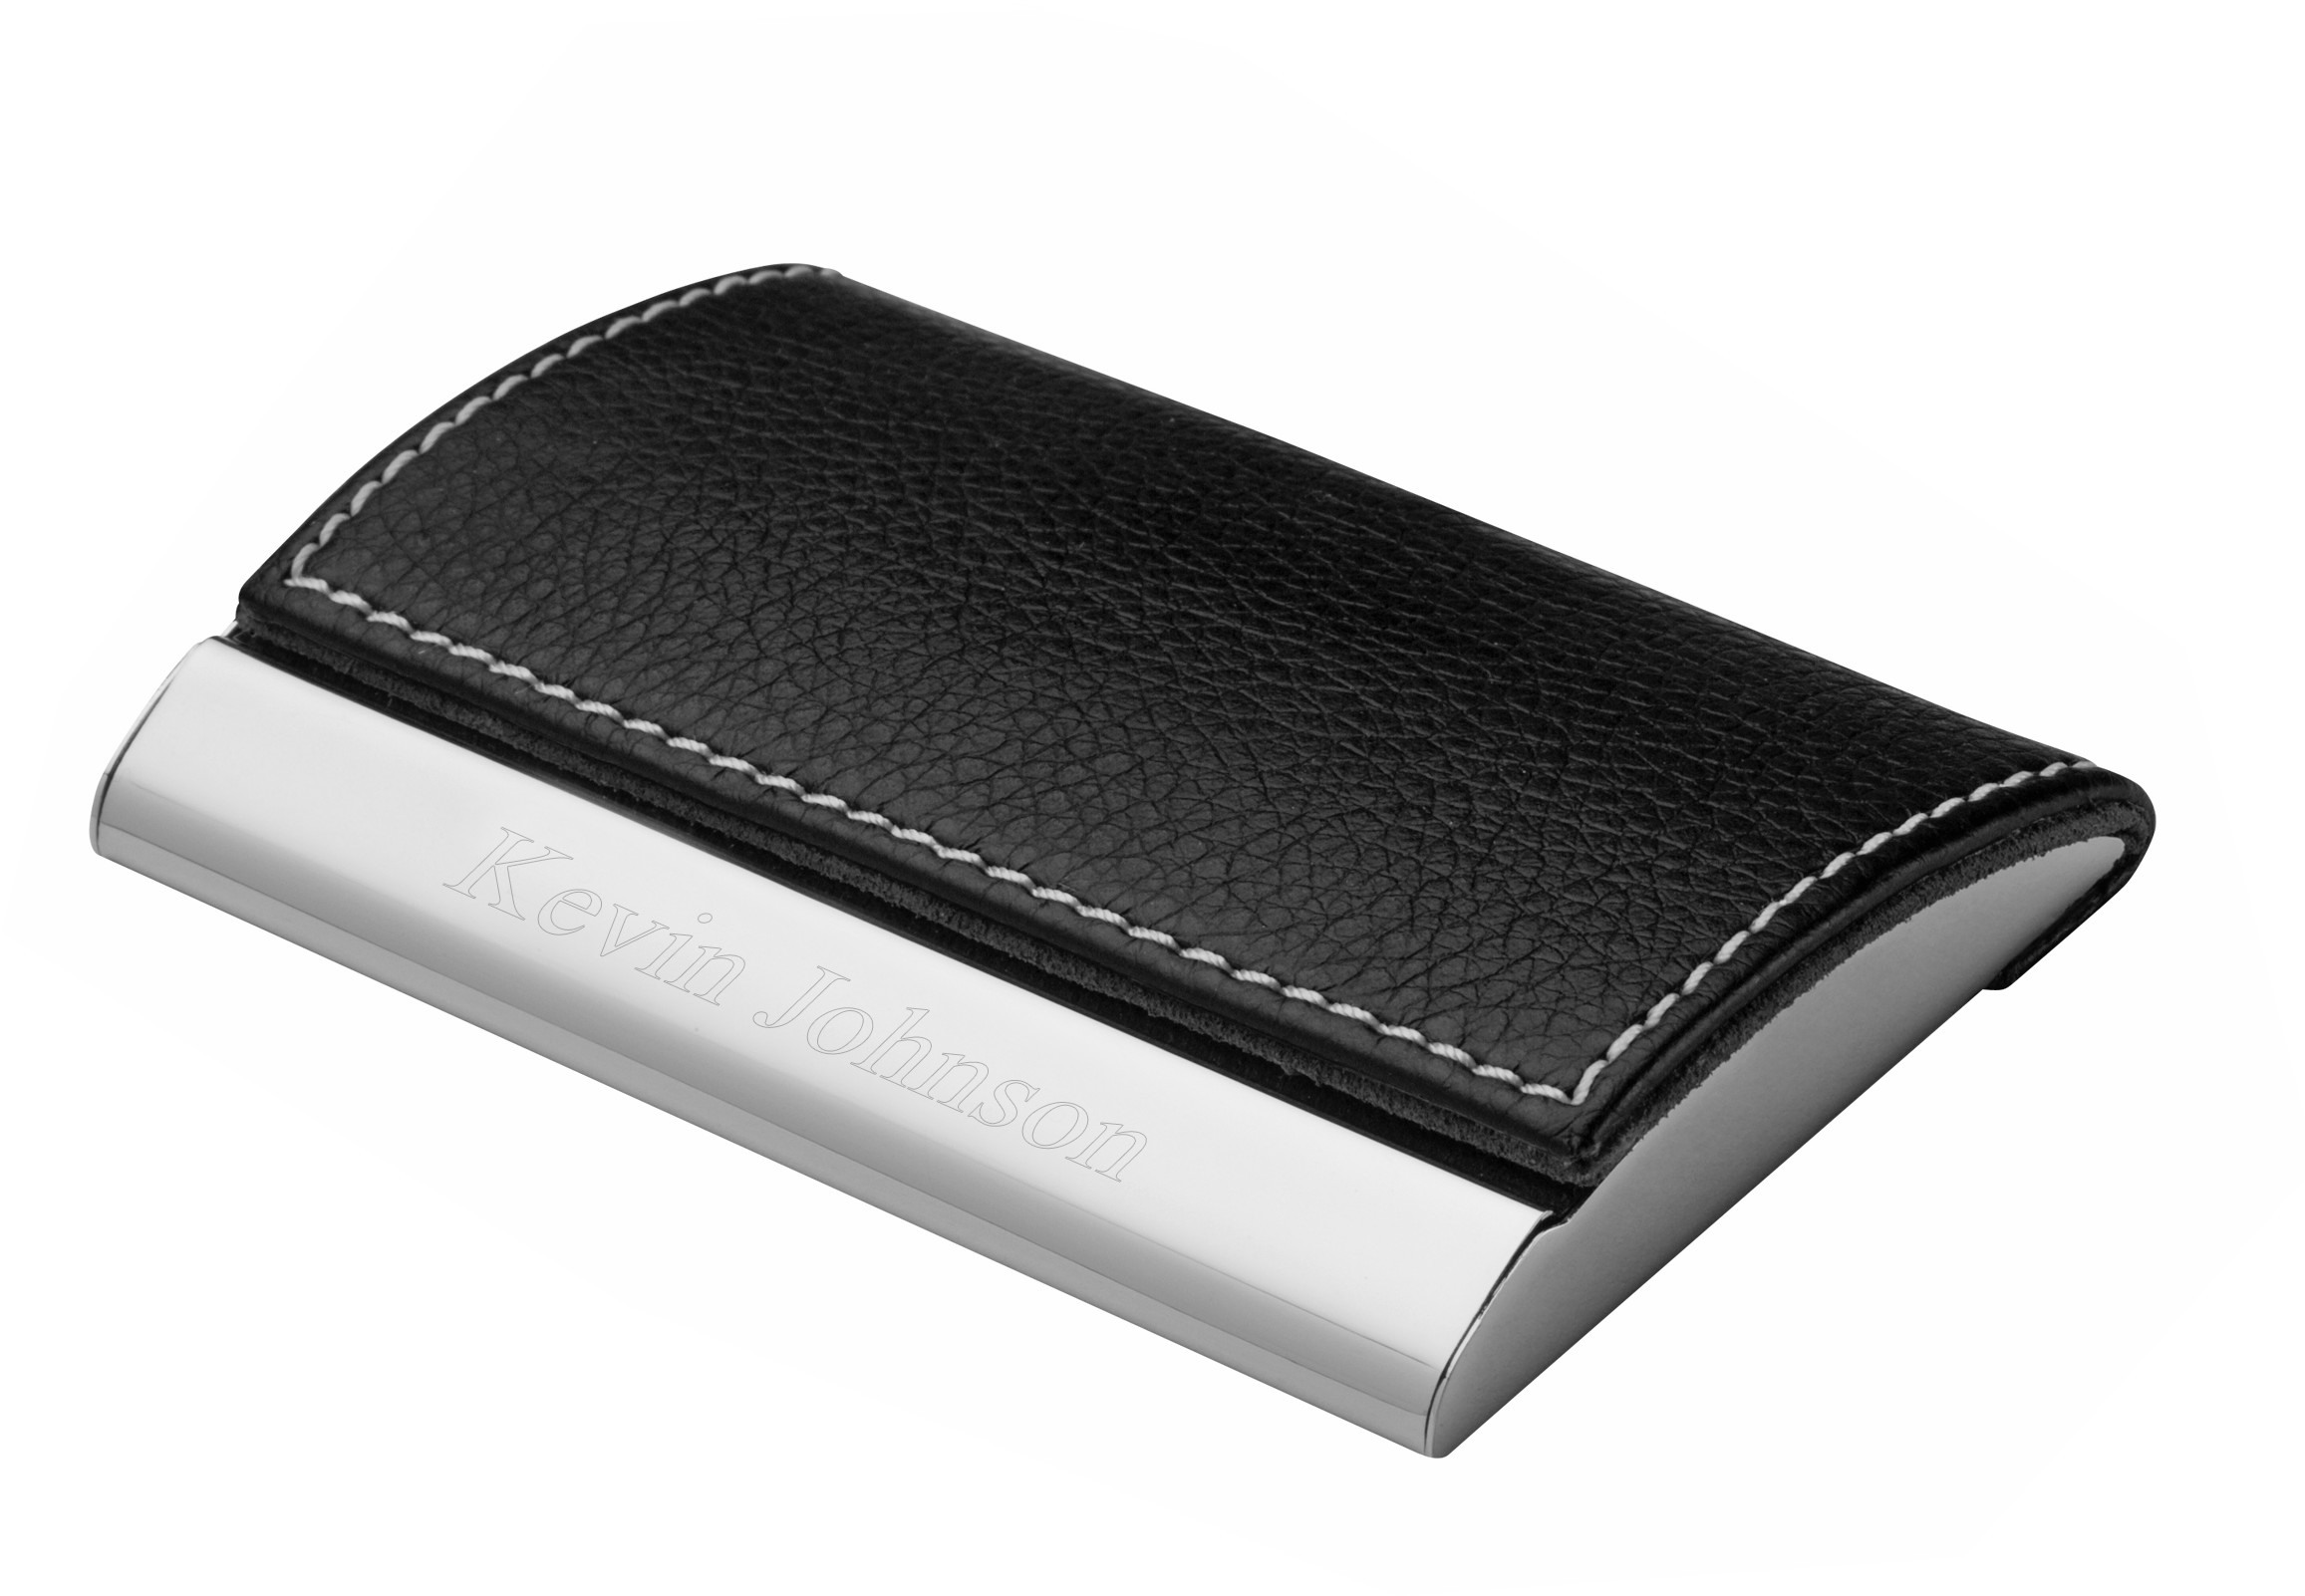 Signature Personalized Black Leather Business Card Case